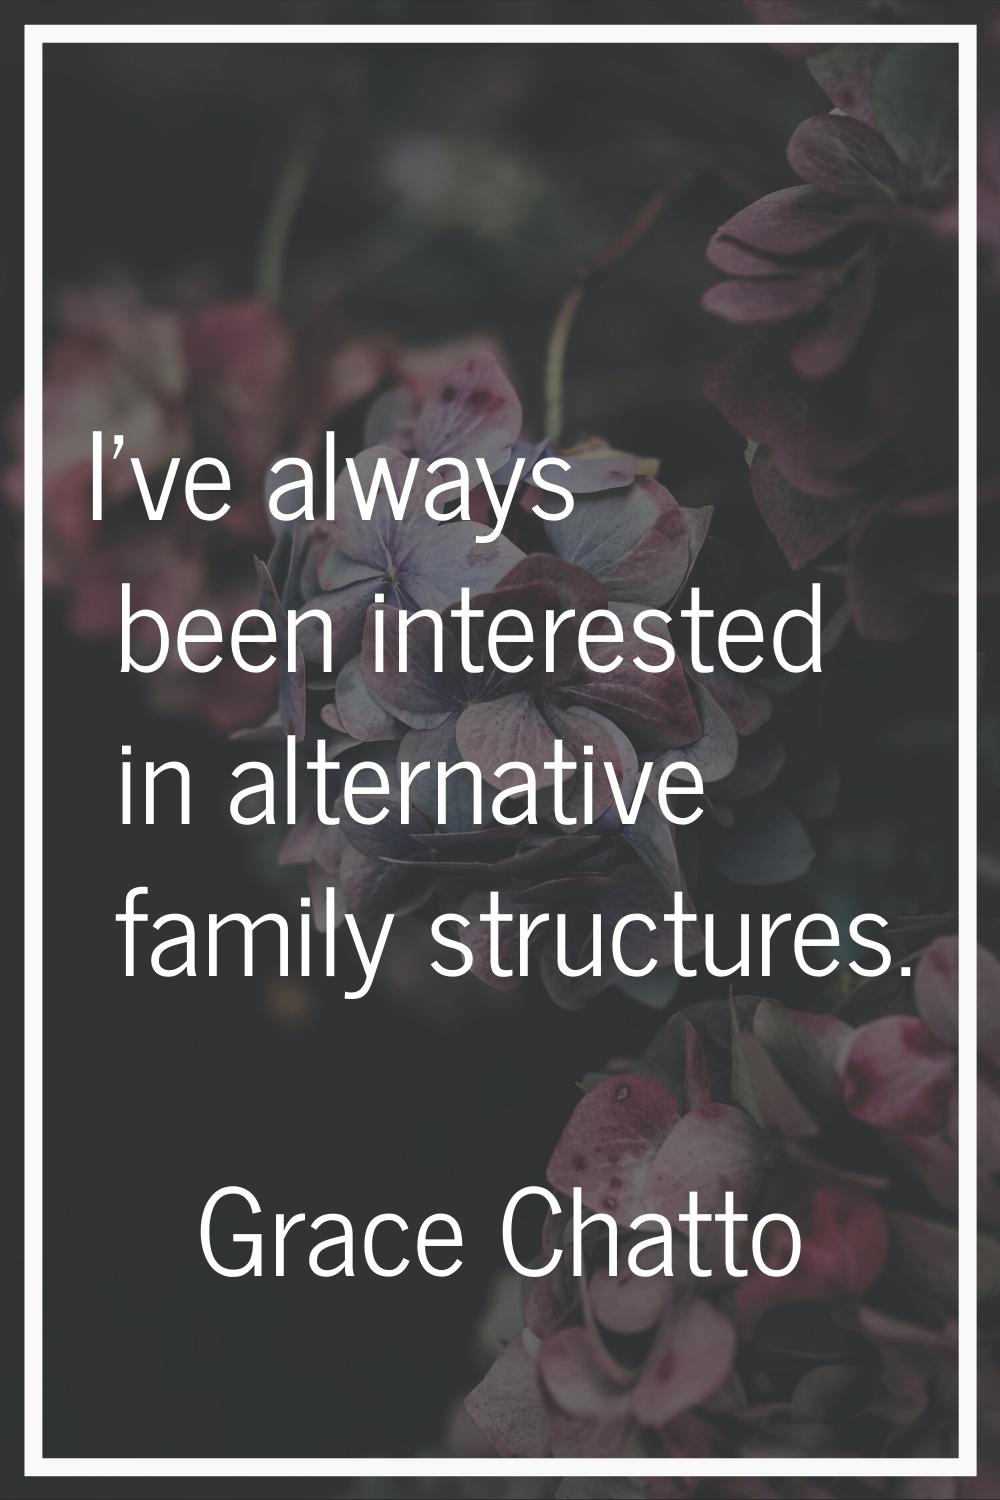 I've always been interested in alternative family structures.